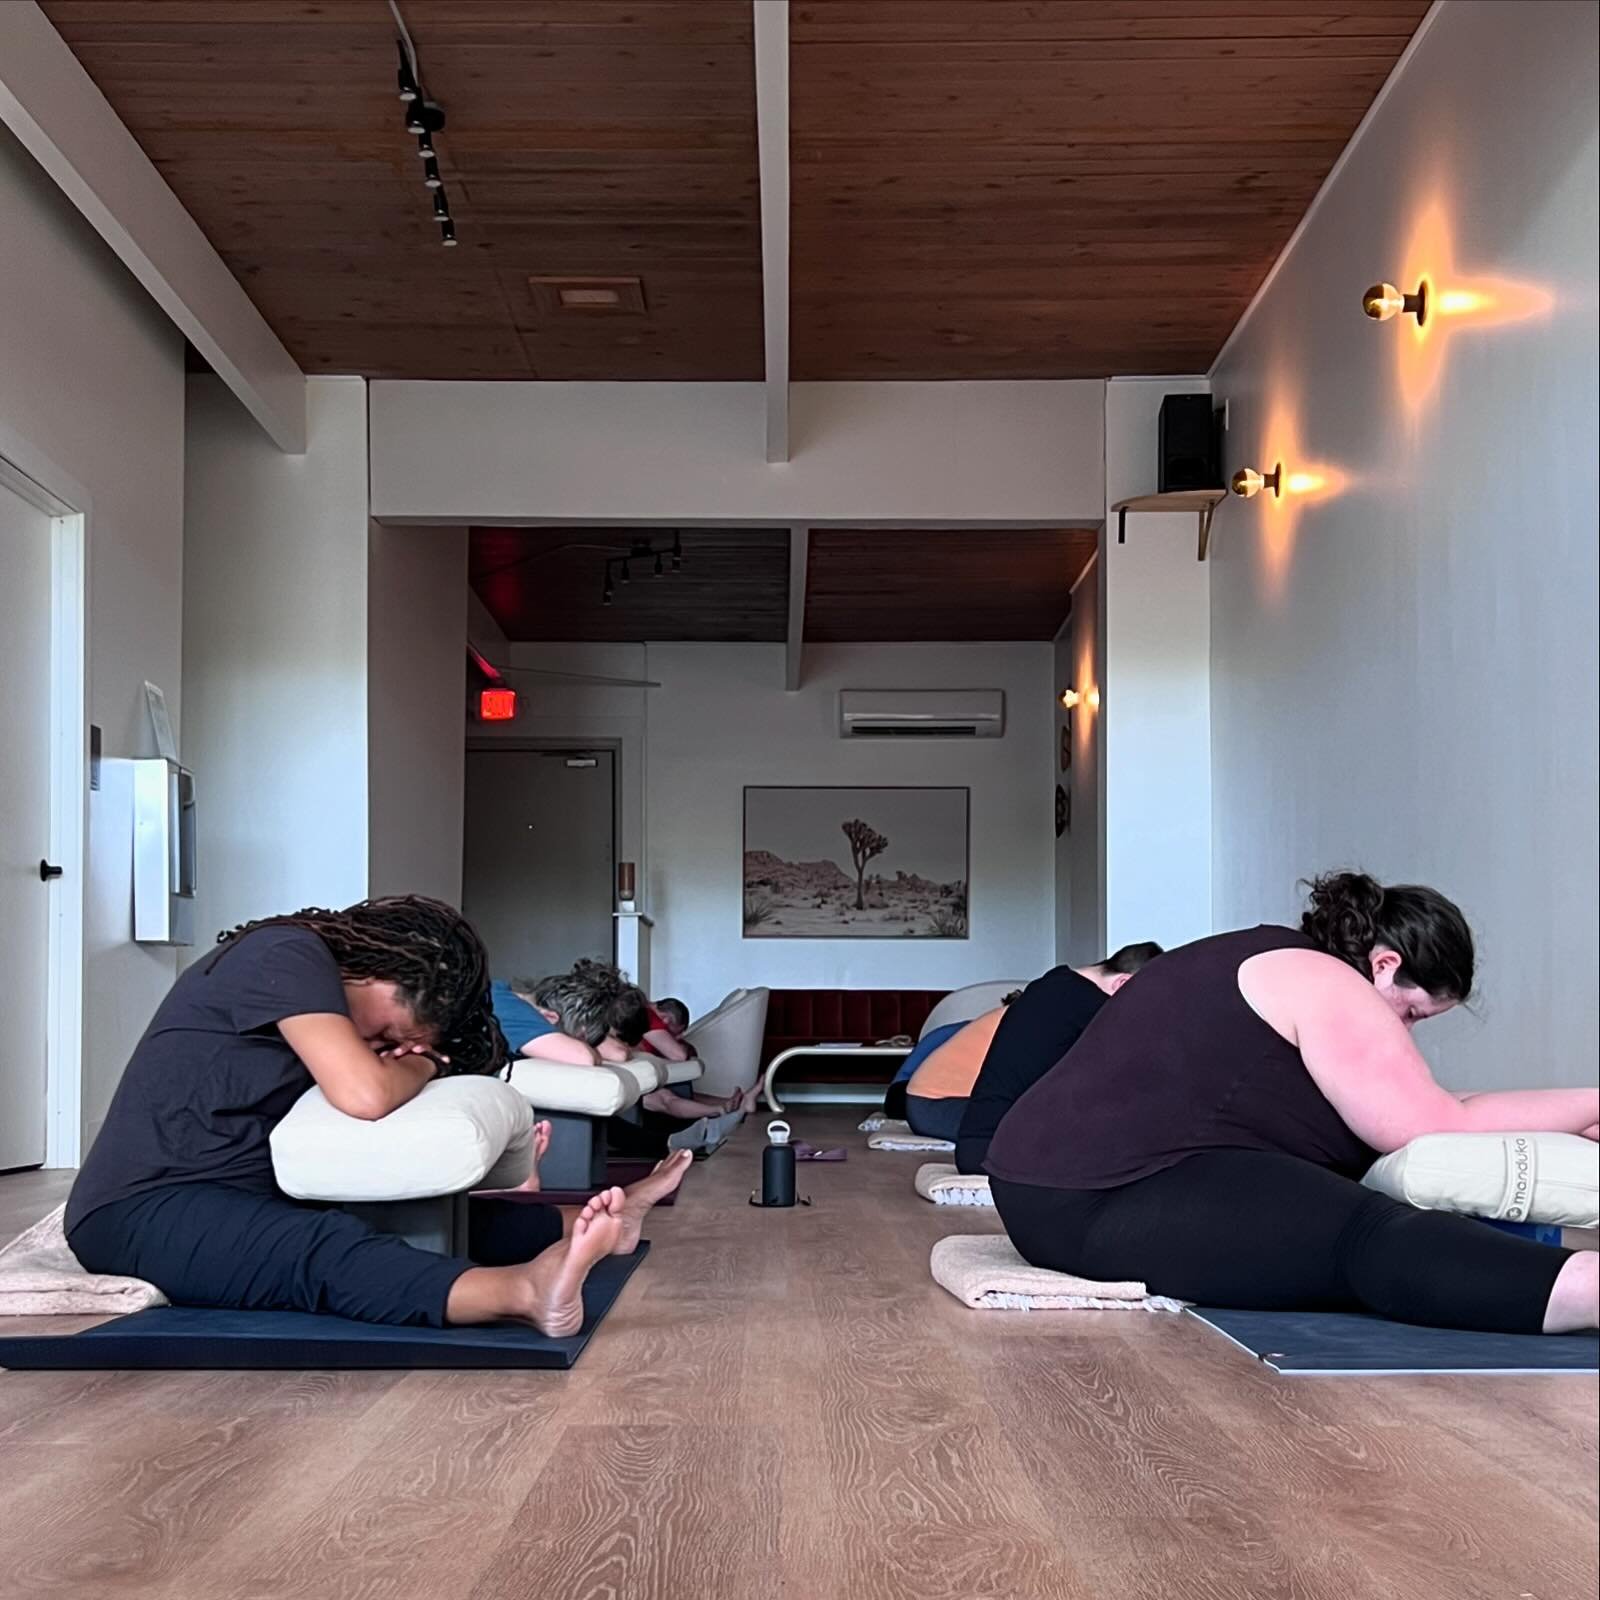 At Zion Well we have a variety of class for all of your needs. Slow Restorative classes like Yin, Restore, Release + Breathe and Meditation. Grounding and stabilizing classes like Slow Vinyasa, Hatha and Yinyasa. Challenging, energizing and playful c